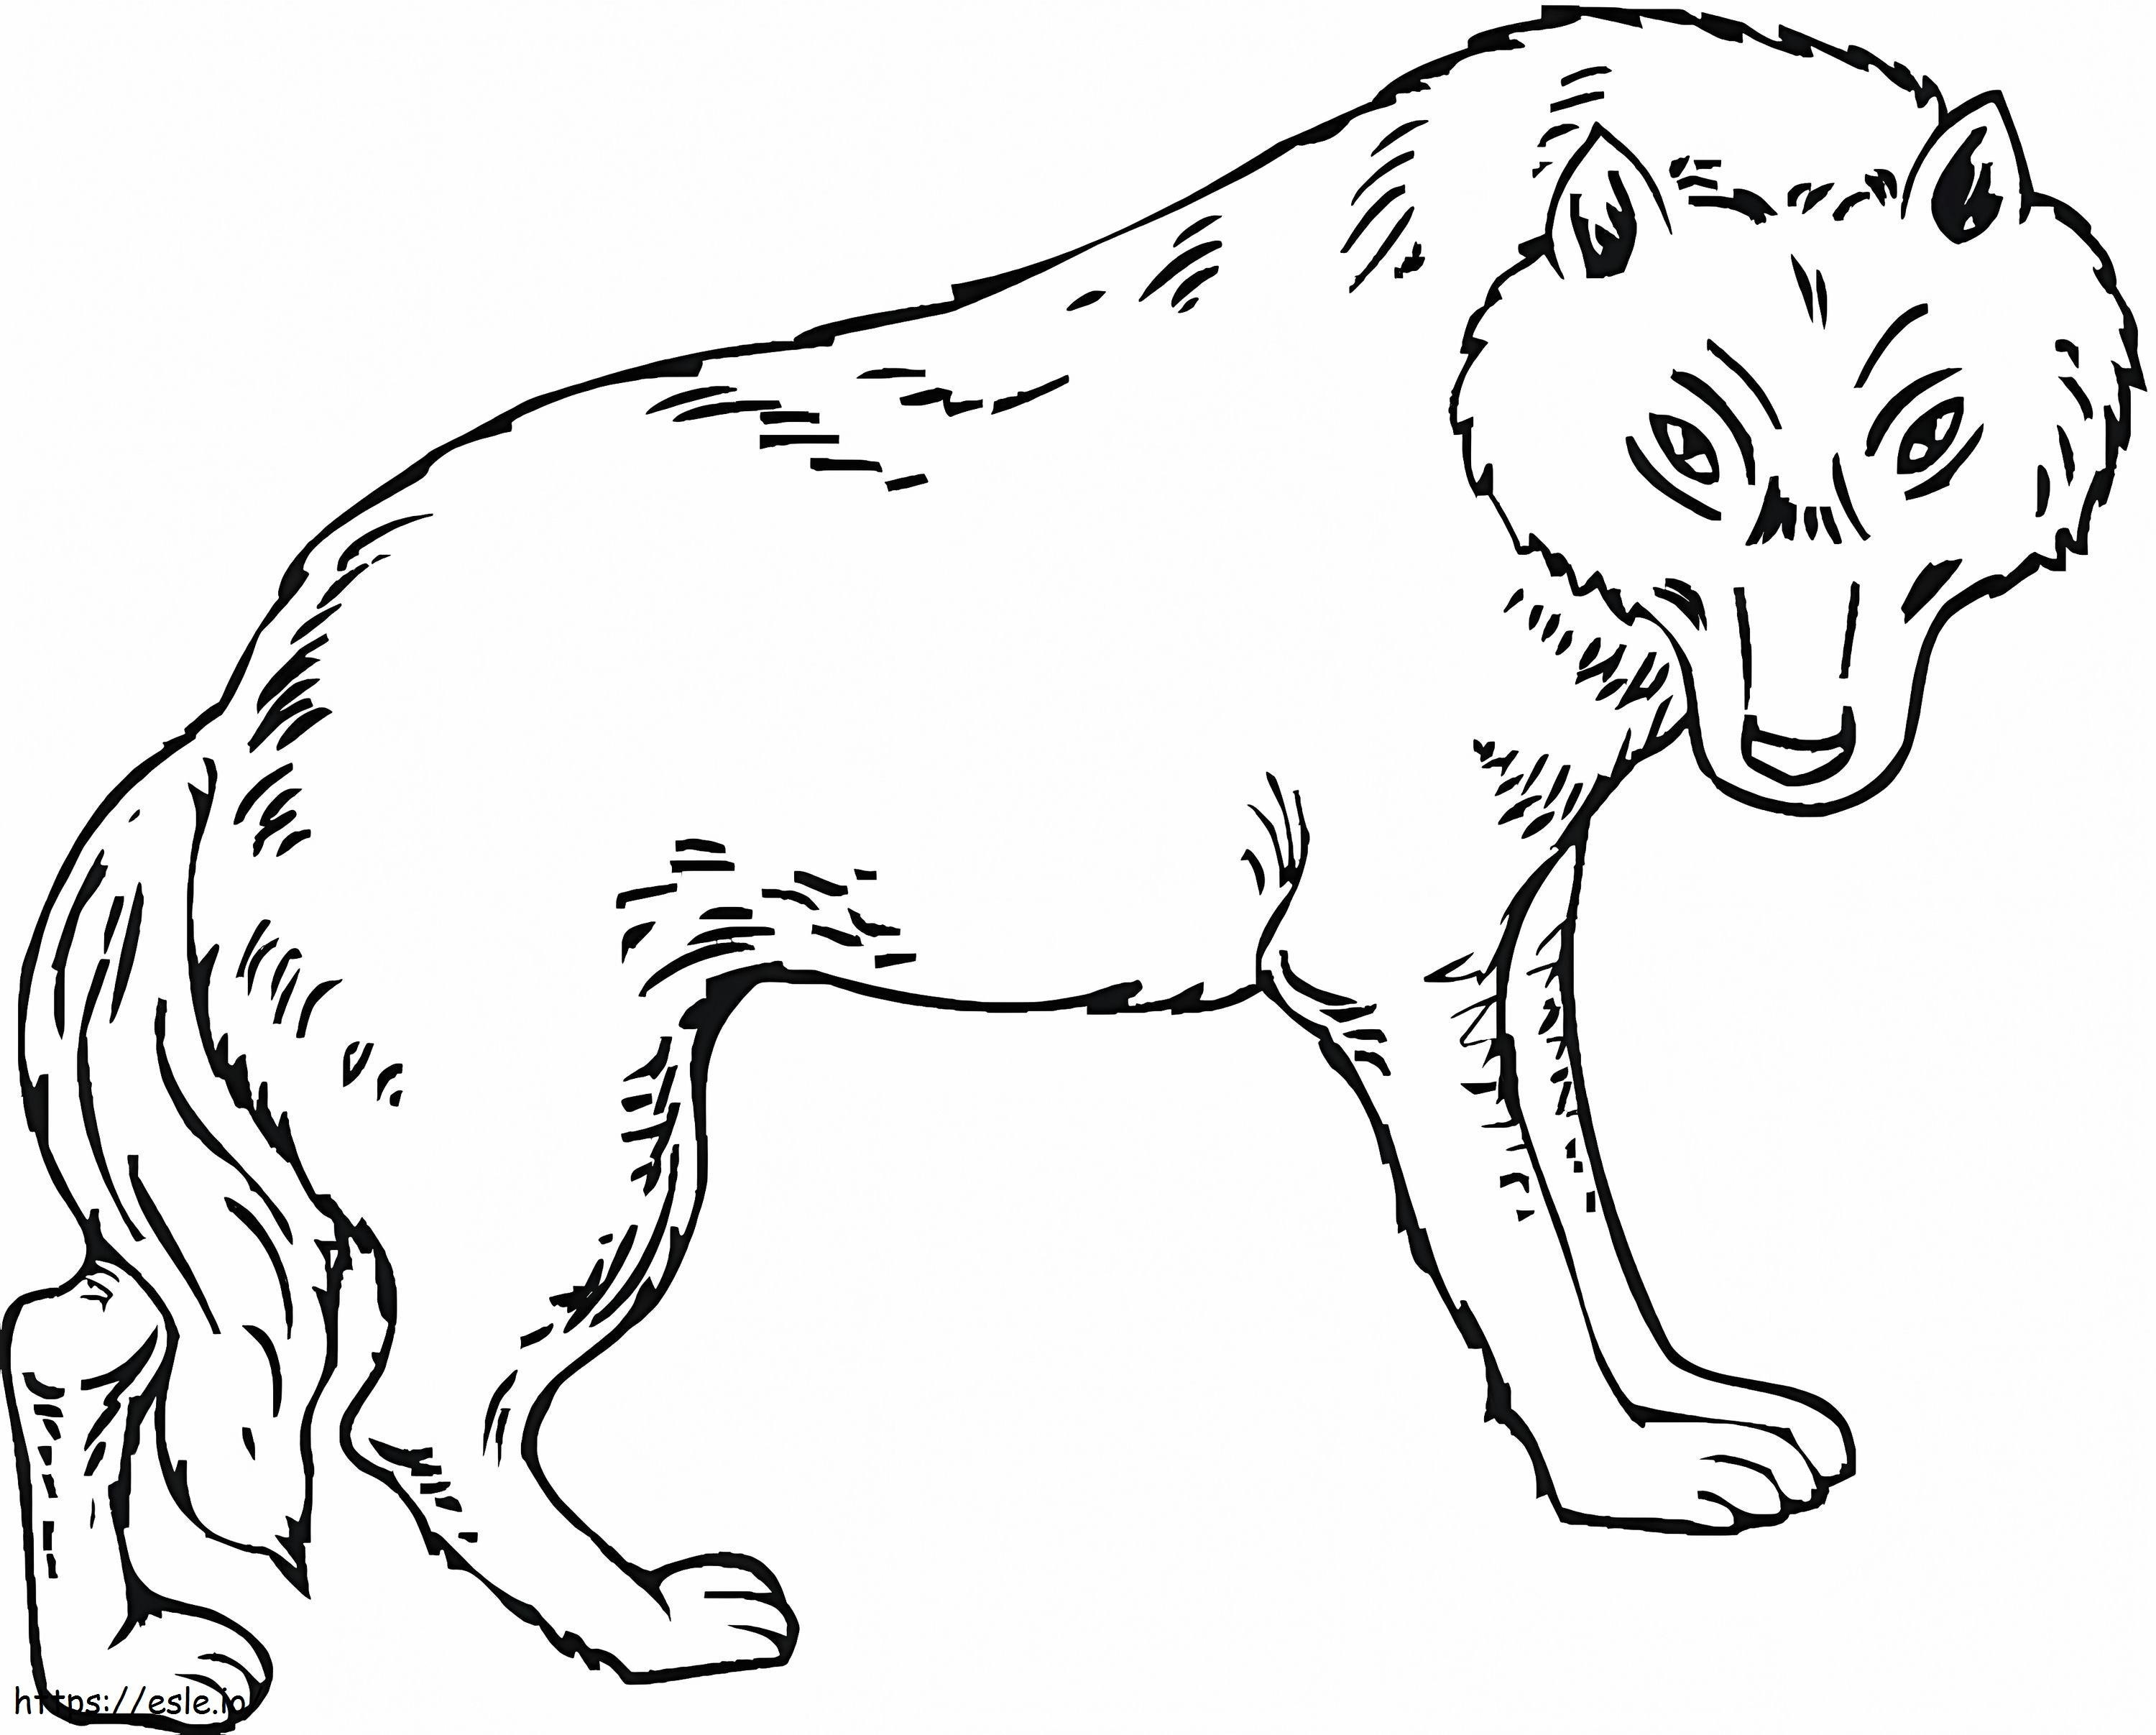 Big Wolfcoloring Page coloring page